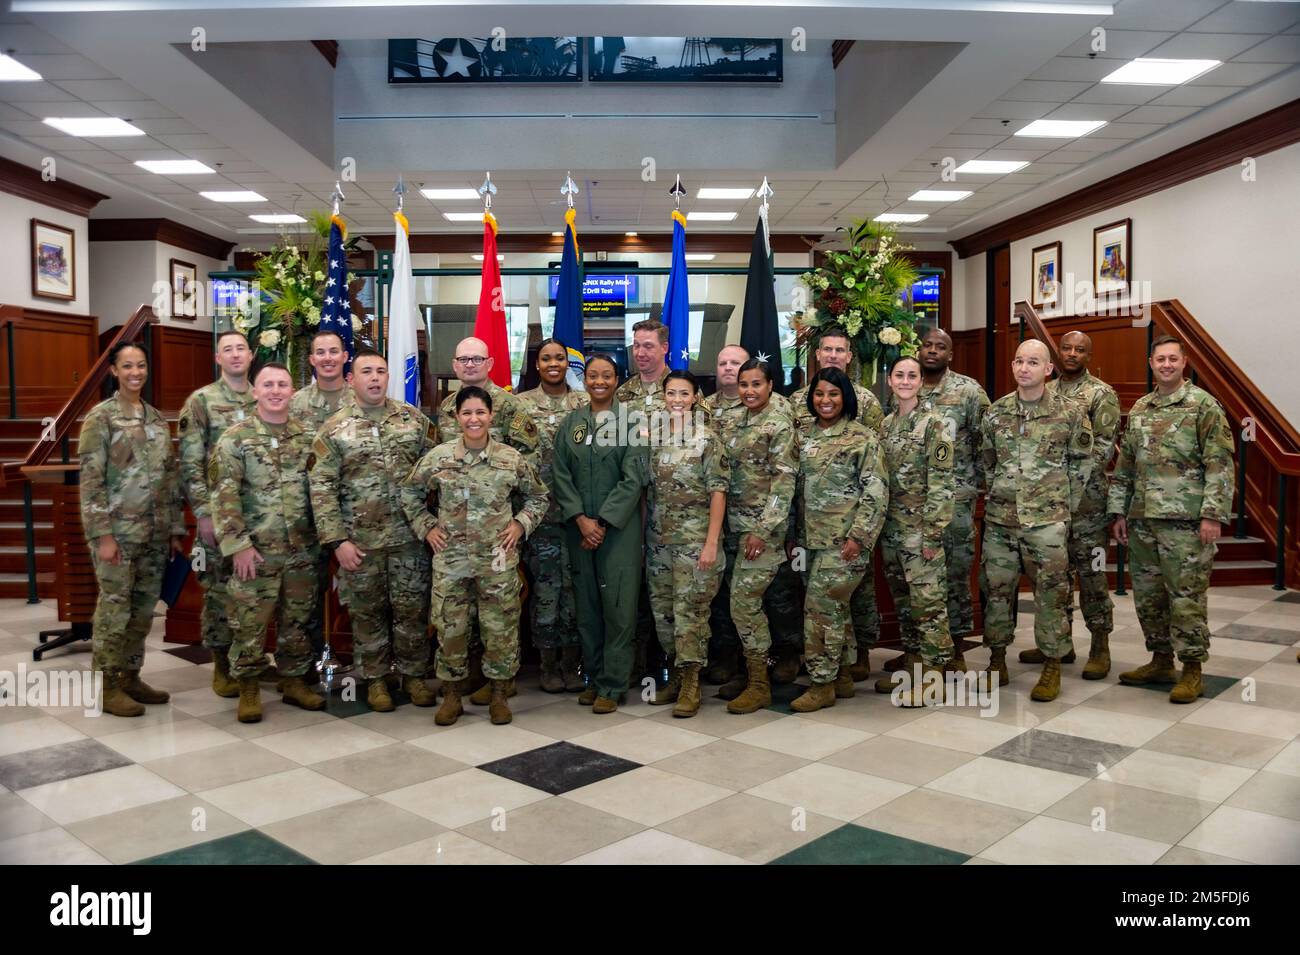 U.S. Air Force senior master sergeant (SMSgt) selects gather for a